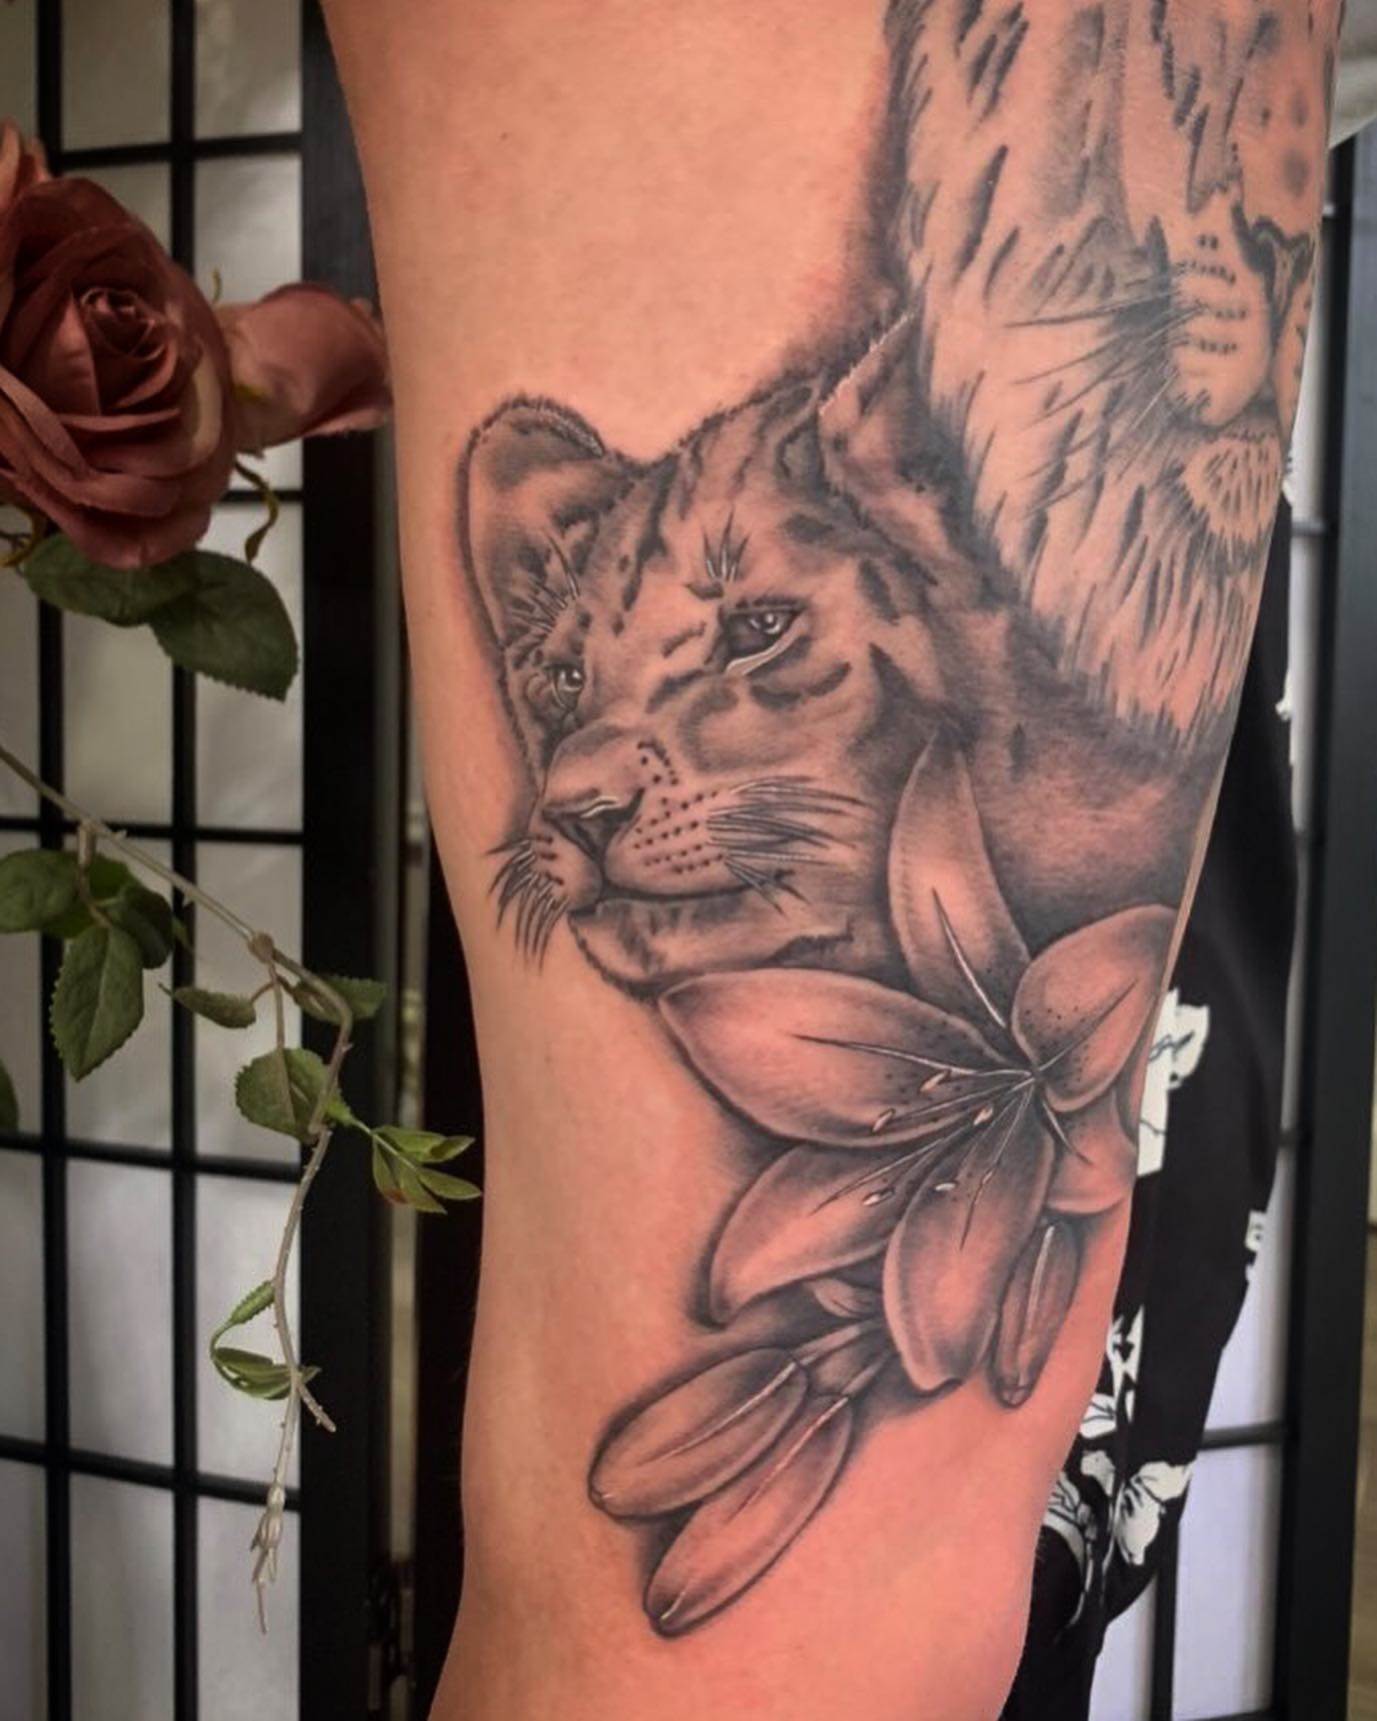 Lion and its cub tattoos are one of the most popular tattoo designs that symbolize strength, power and protection. When a lily is added below them, the love and affection between these two prevail.